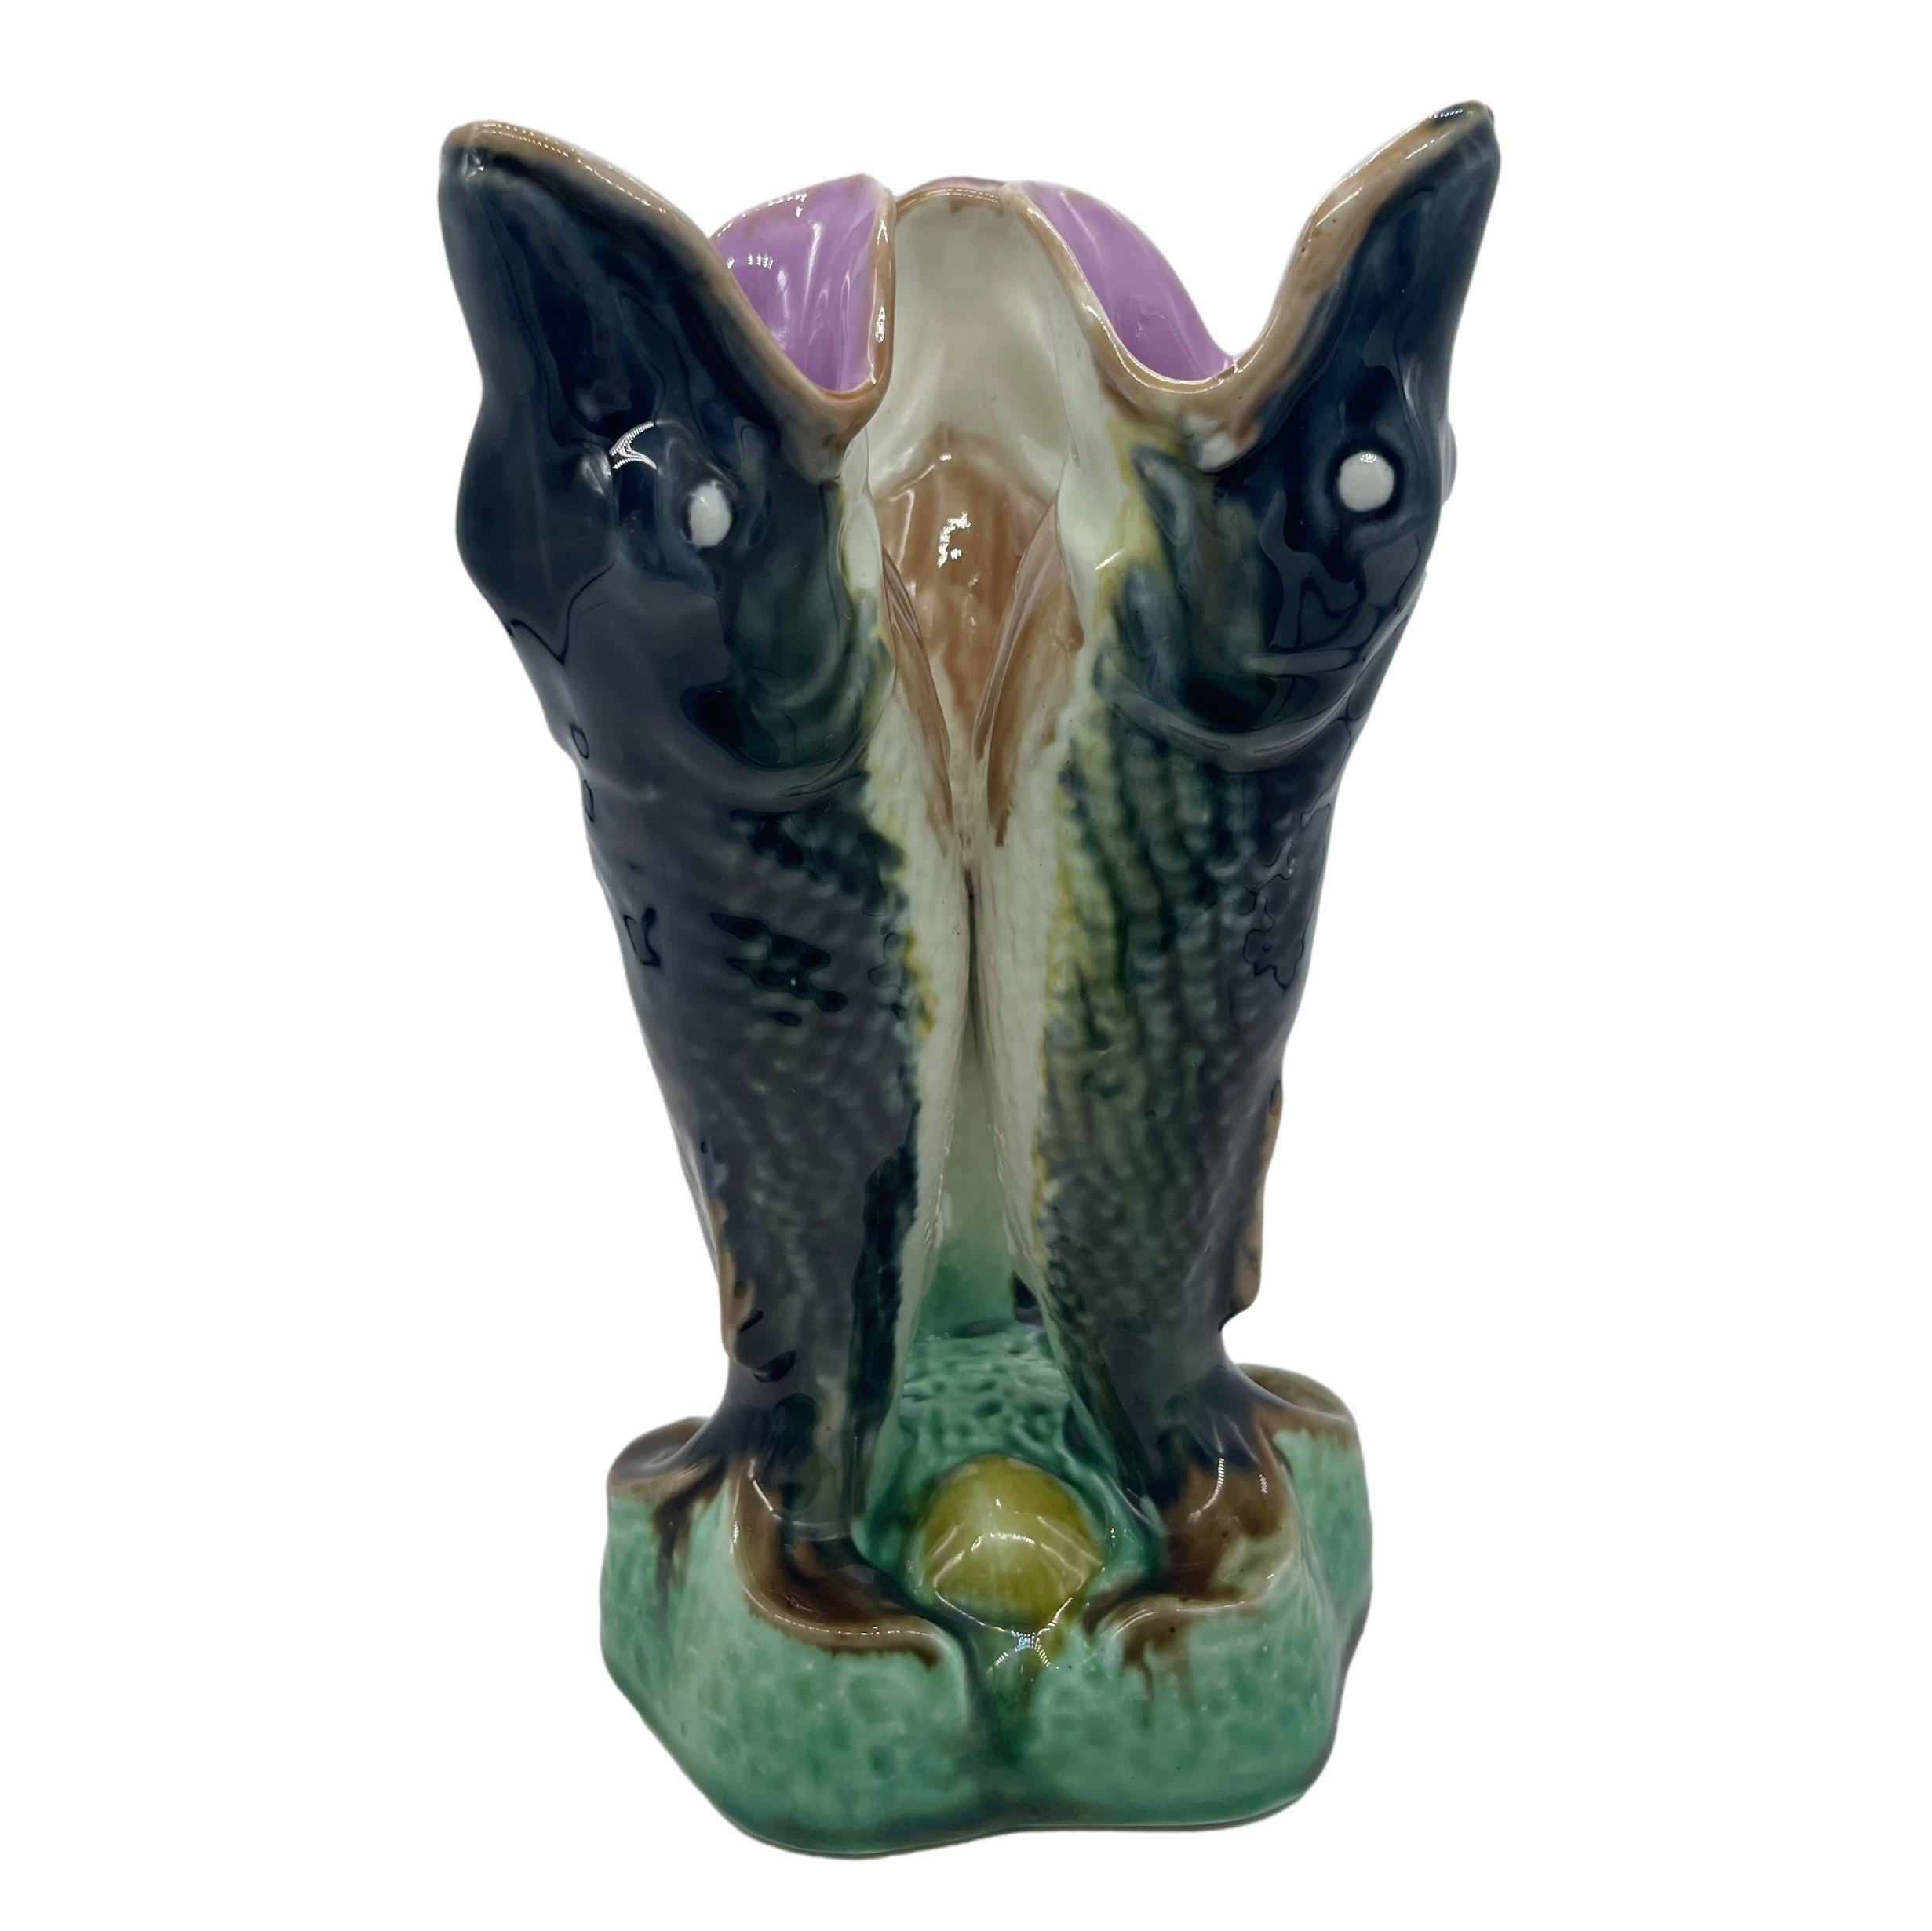 Molded Triple Gurgling Fish Posy Vase by Adams & Bromley, English, ca. 1877